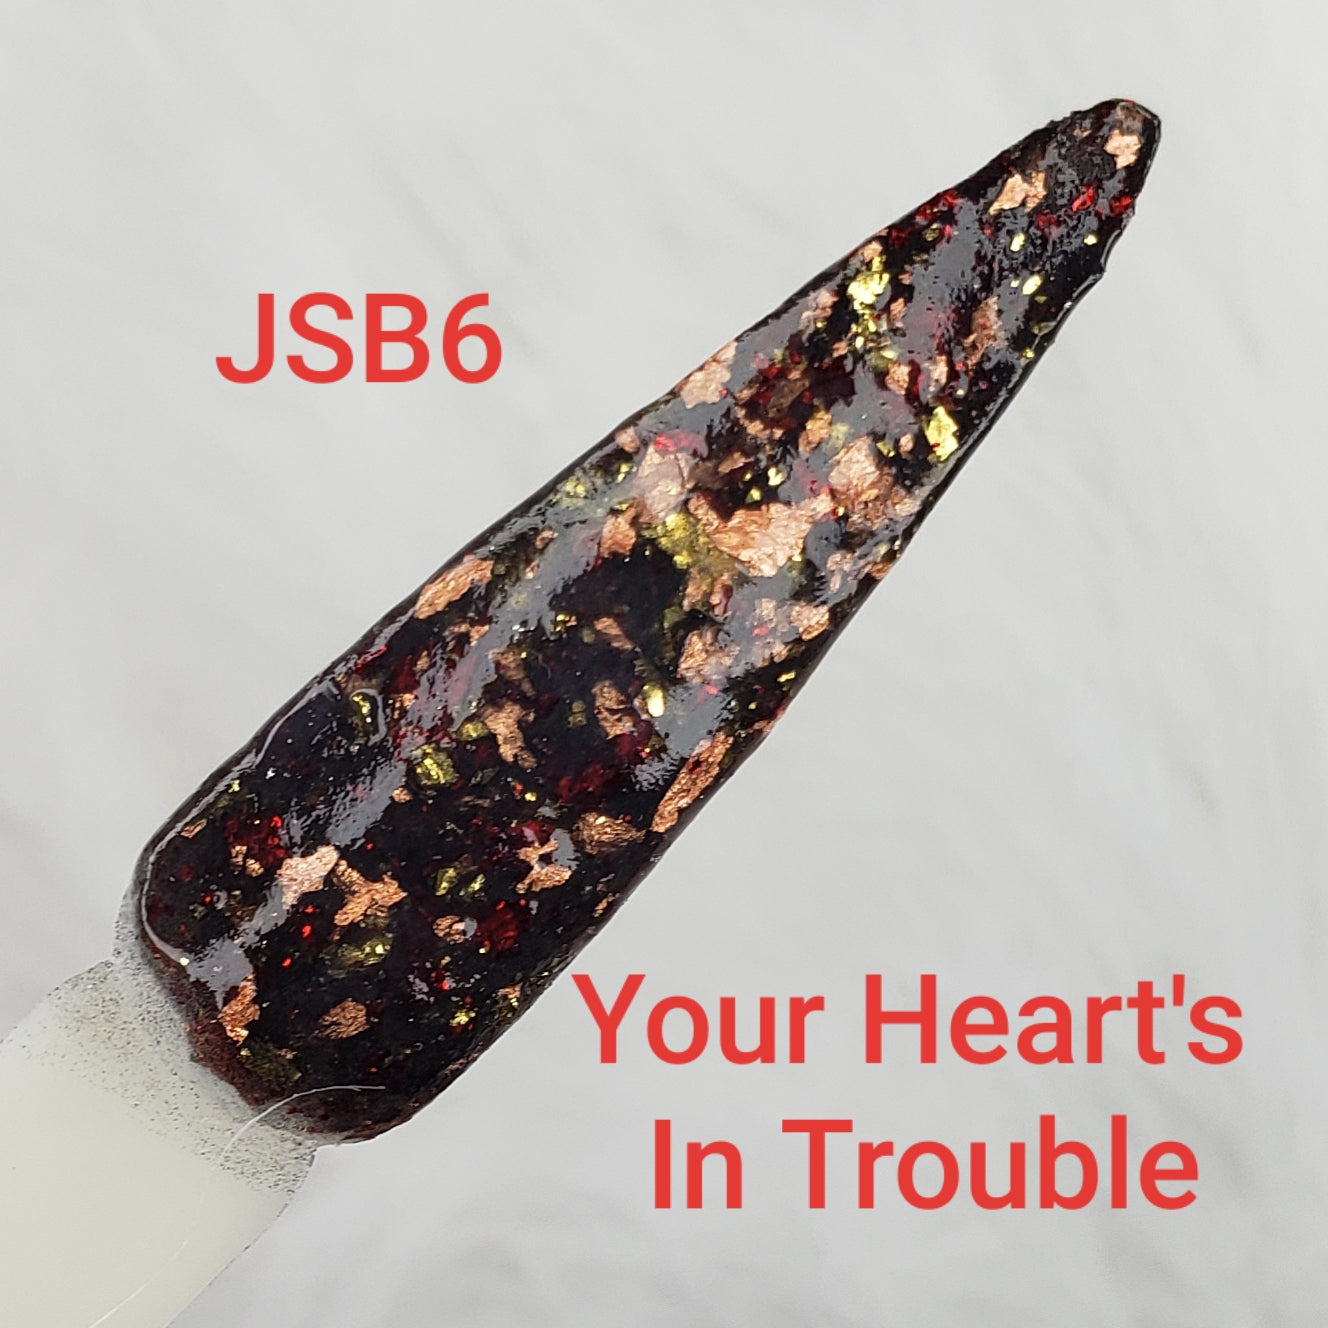 Your Hearts in Trouble JSB6